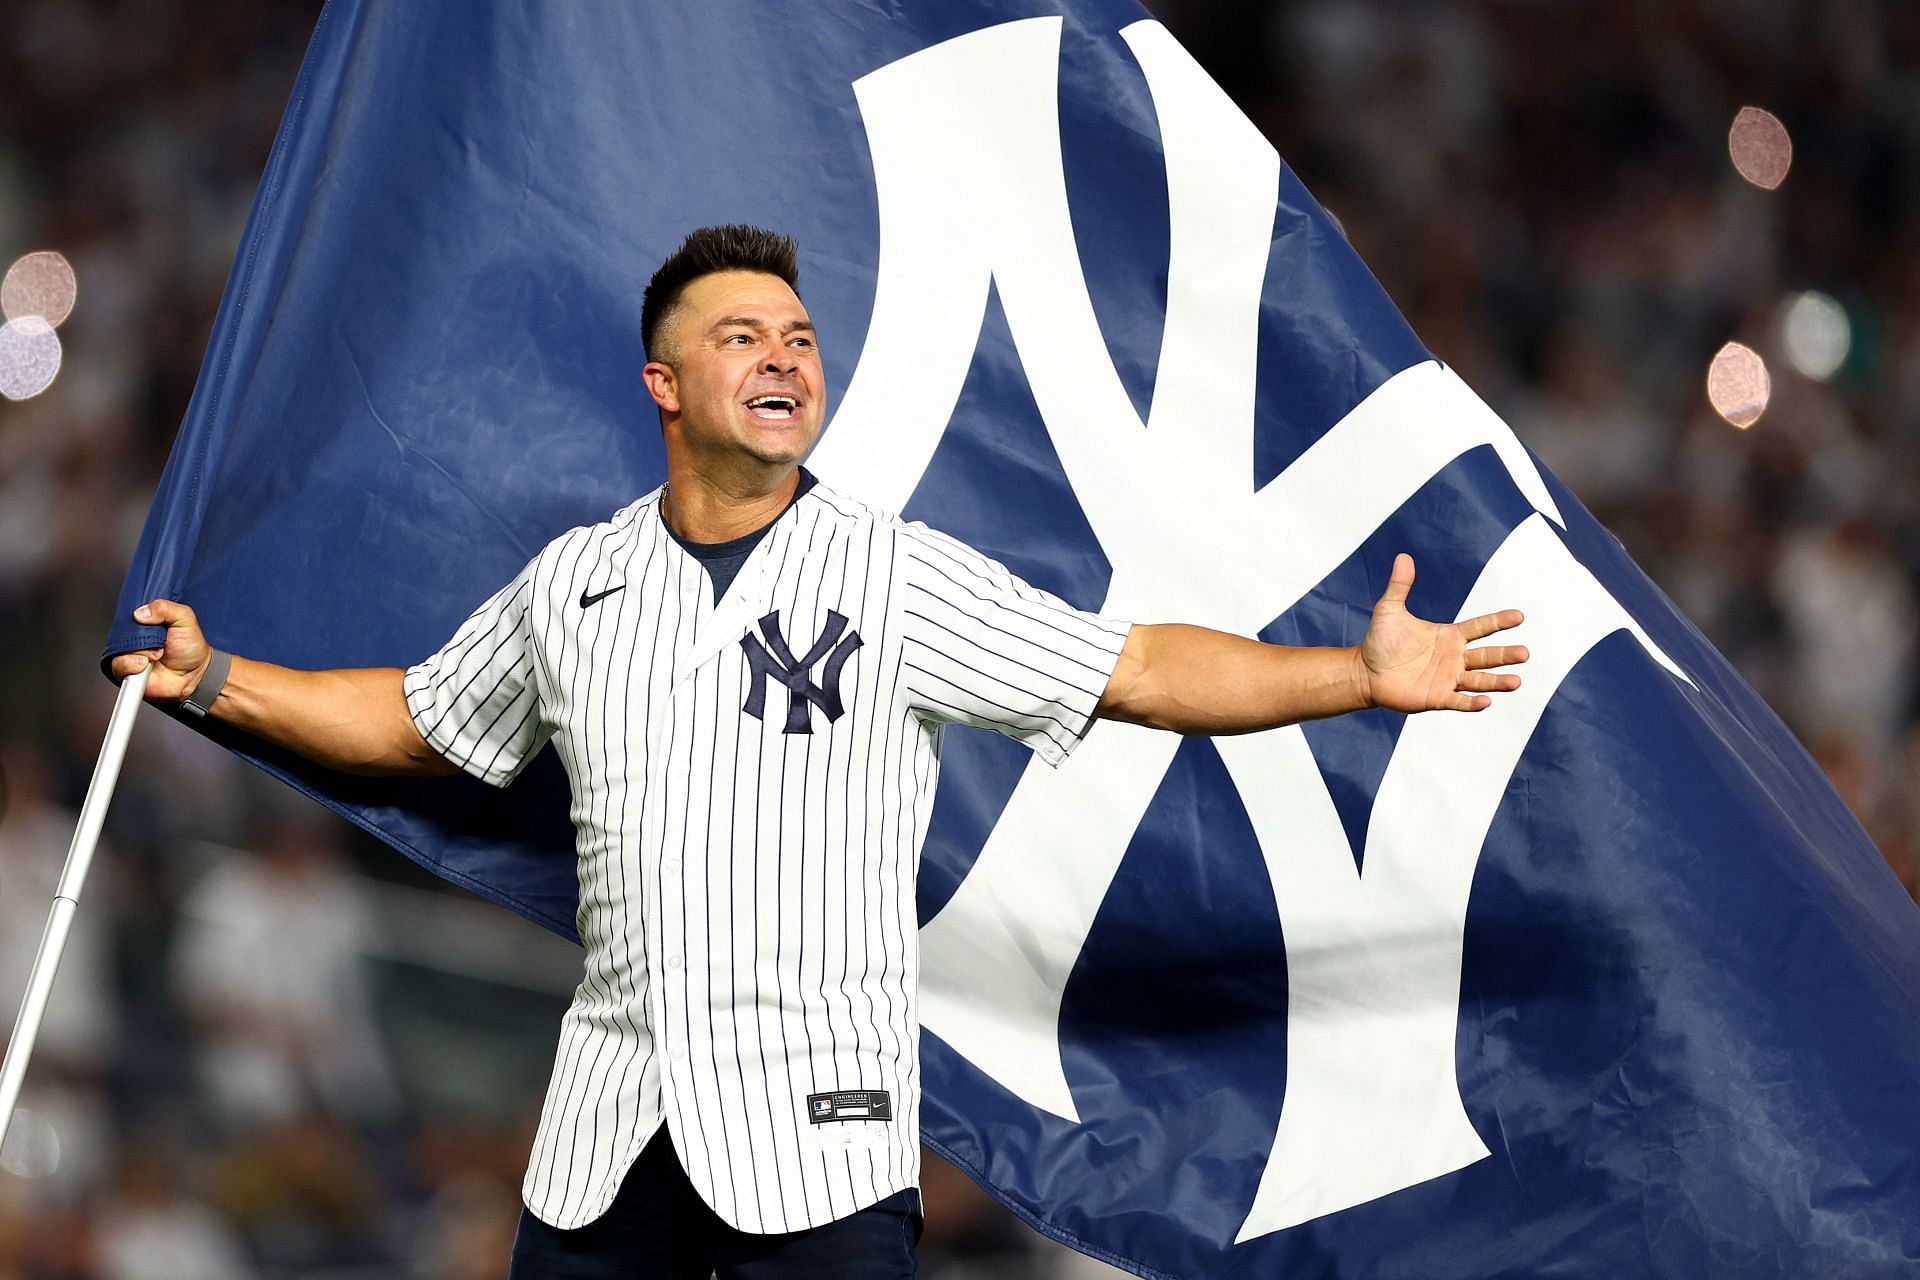 Nick Swisher boldly declares that the Yankees are ready to defeat